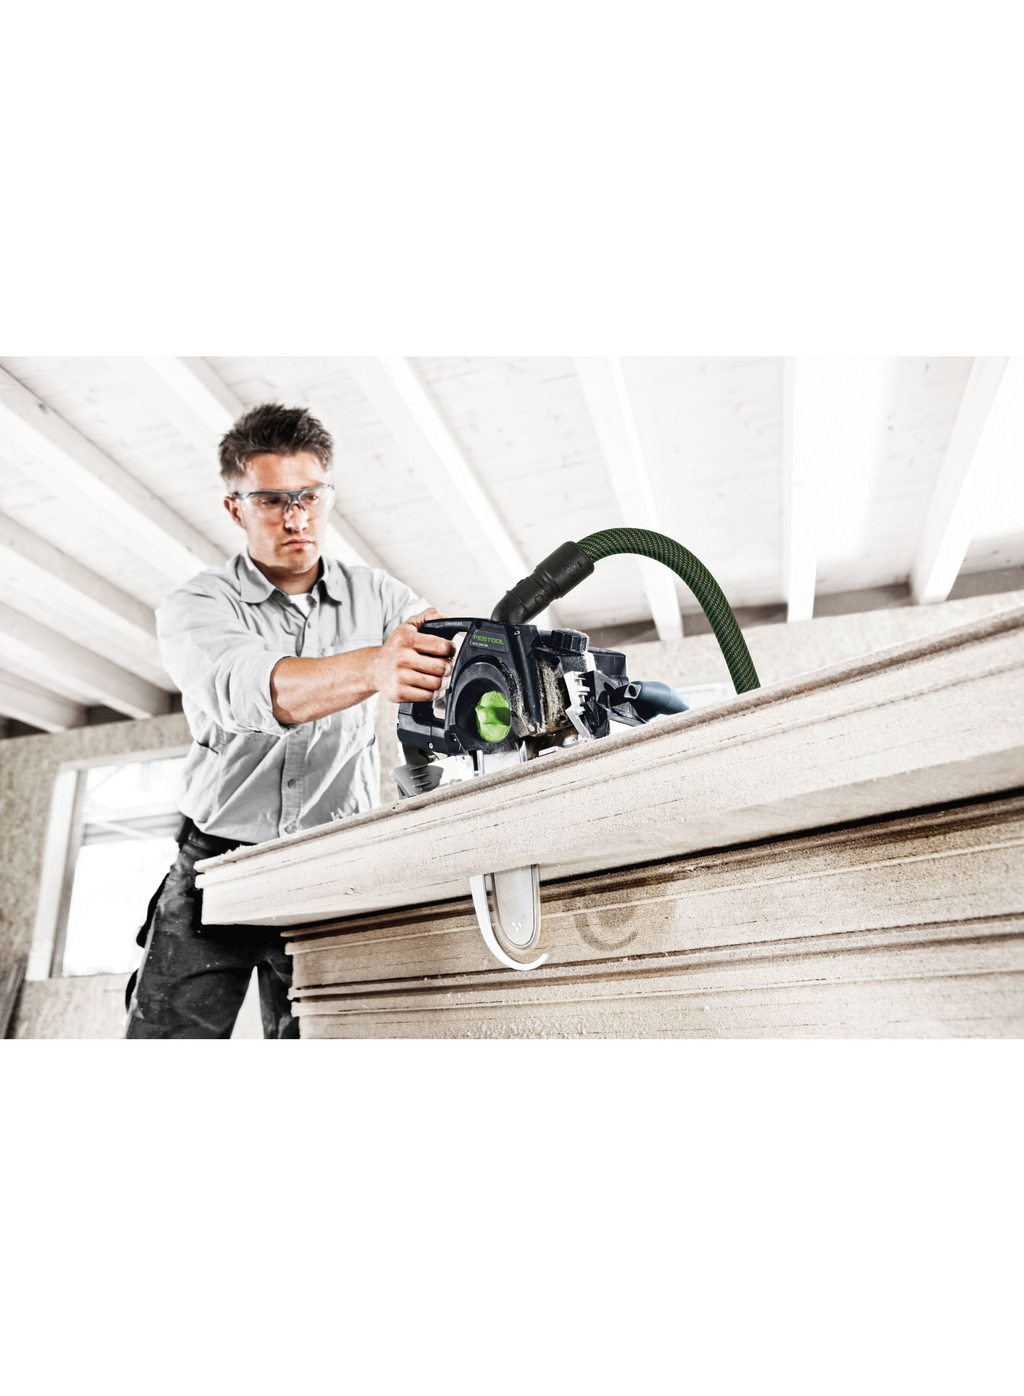 The Festool sword saw is perfect for cutting pressure-resistant insulating materials. Easy and affordable rental with BIYU.